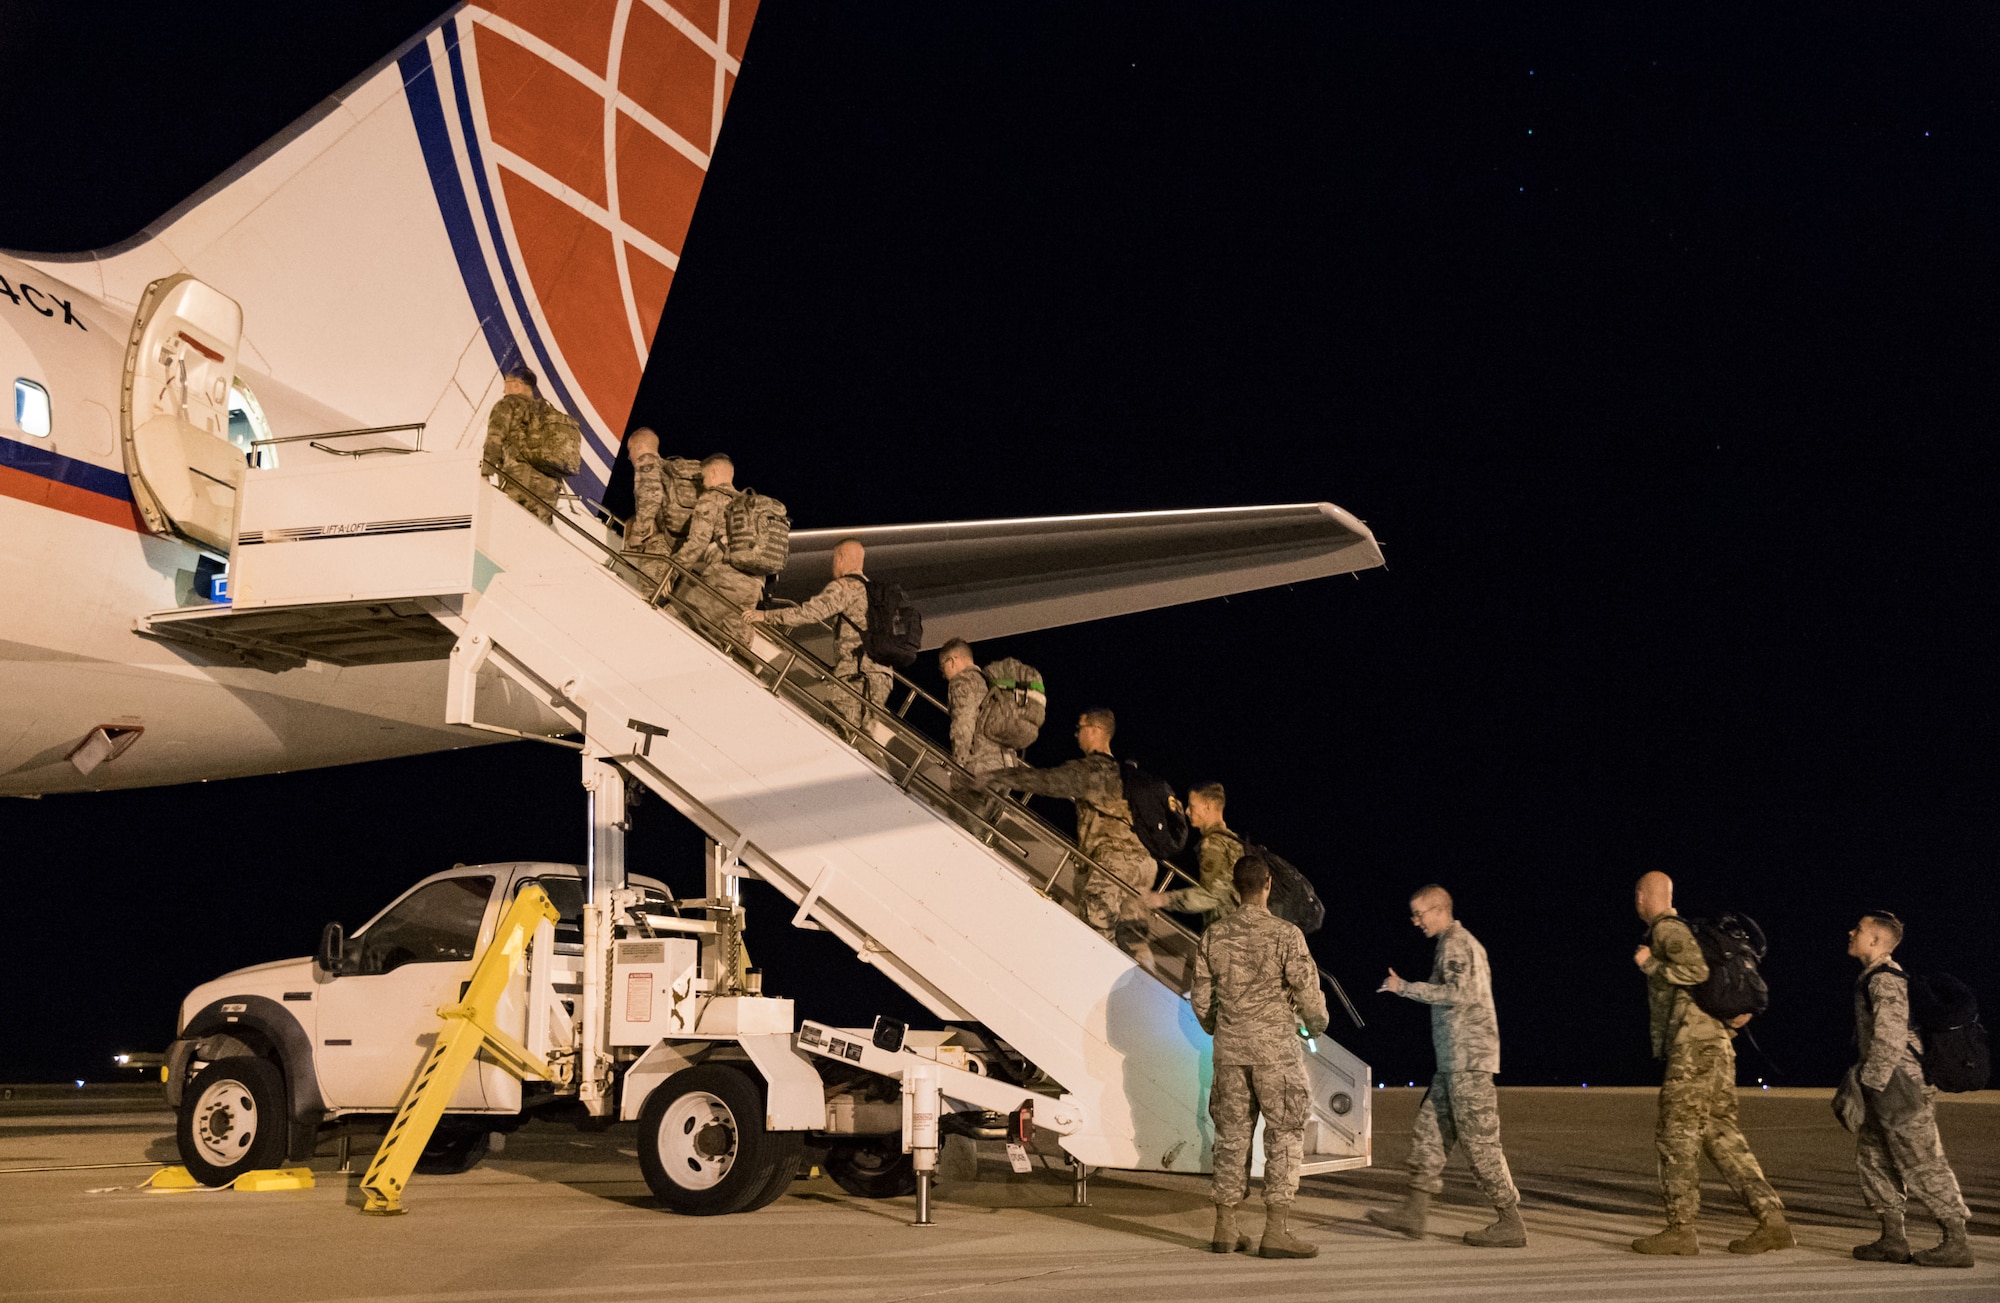 Team Dover members use the step truck to enter the passenger seating section of an Air Transport International Boeing 757-200 Sept. 8, 2019, at Dover Air Force Base, Del. The ATI aircraft, part of the Civil Reserve Air Fleet program, was contracted to transport cargo and 30 Team Dover members to Fairchild AFB, Wash., participating in Mobility Guardian 2019. “Air Mobility Command’s commercial airlift partners are a vital part of our daily airlift missions around the world as well as our wartime effort,” said Maj. Adam Crane, AMC Headquarters CRAF Branch Chief, Scott AFB, Ill. (U.S. Air Force photo by Roland Balik)